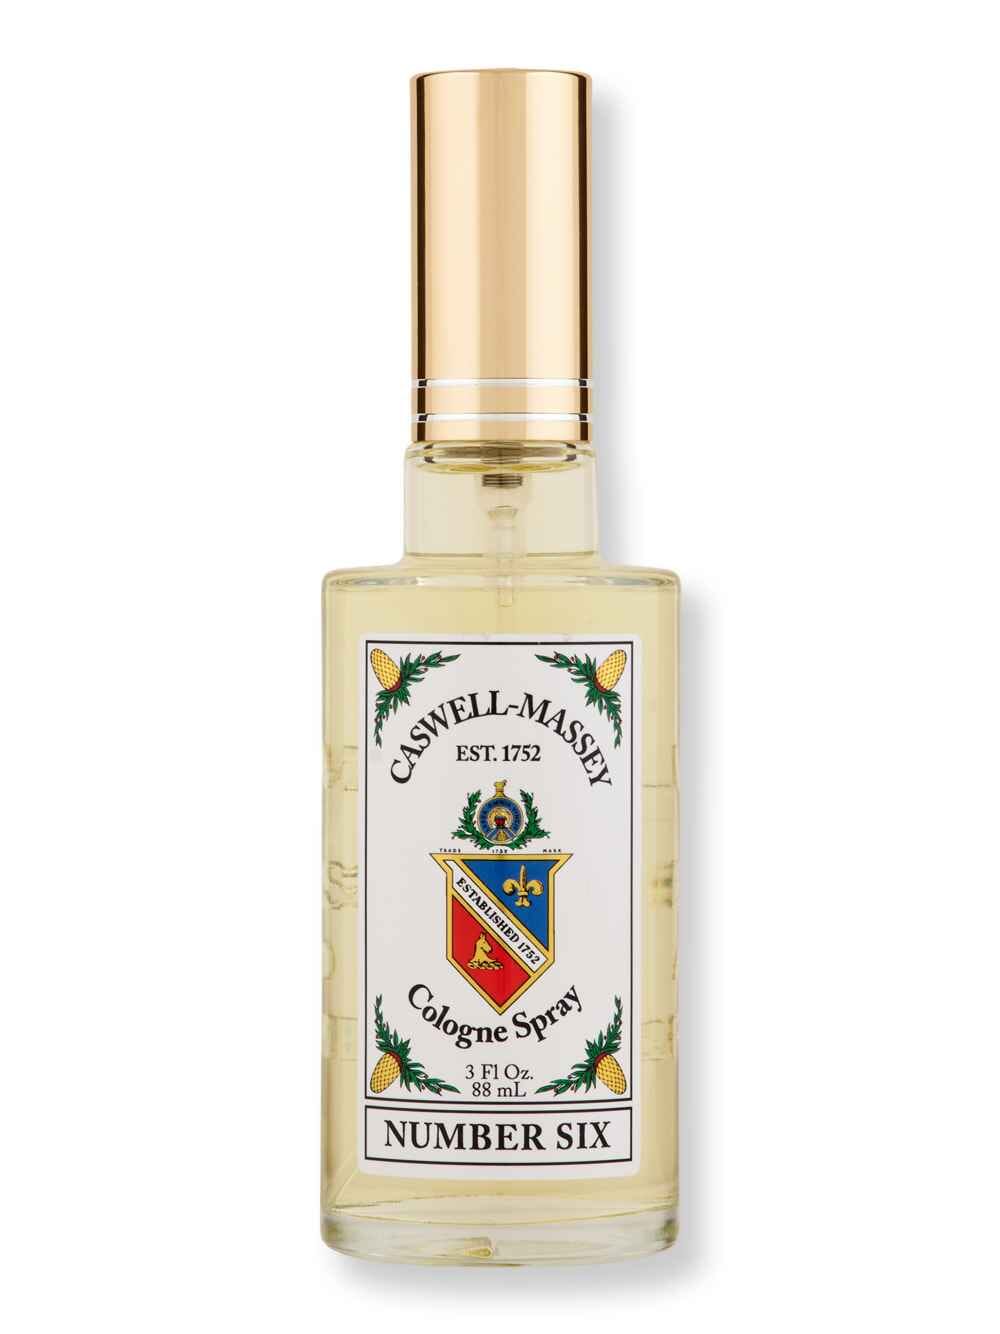 Caswell Massey Caswell Massey Number Six Cologne 88 ml Perfumes & Colognes 